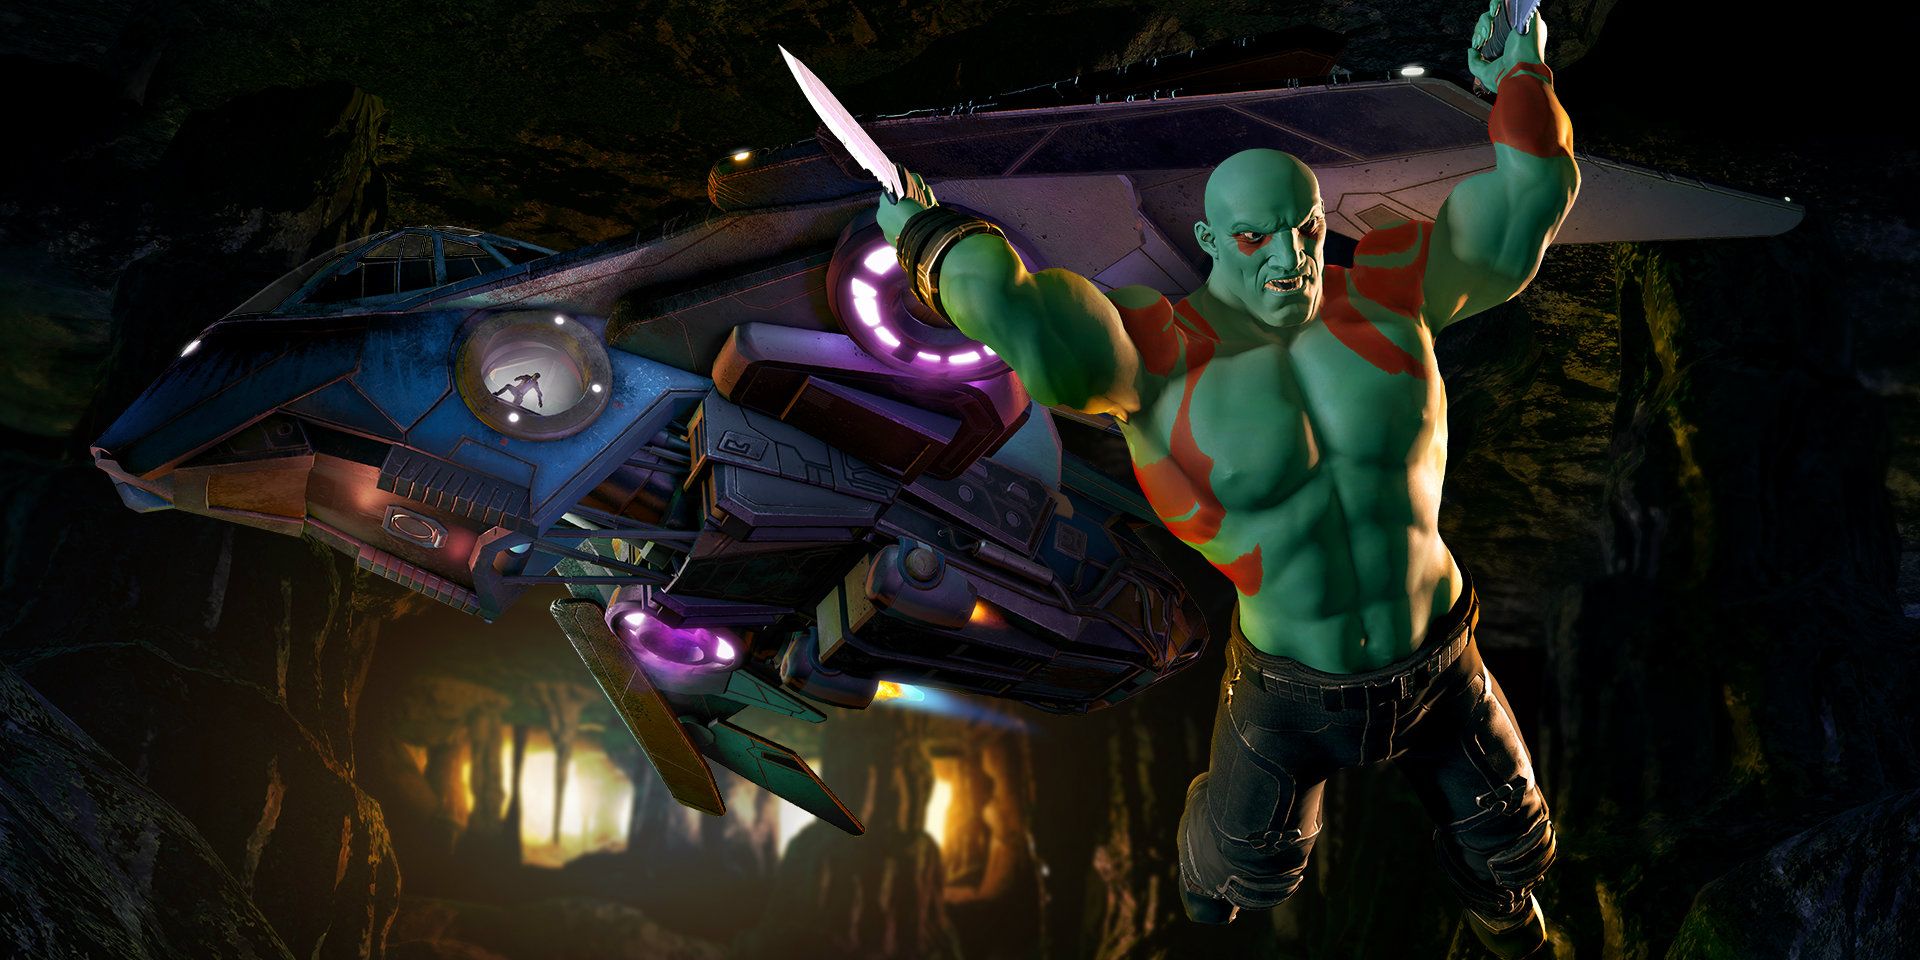 An image of a ship and Drax in Guardians of the Galaxy Telltale game